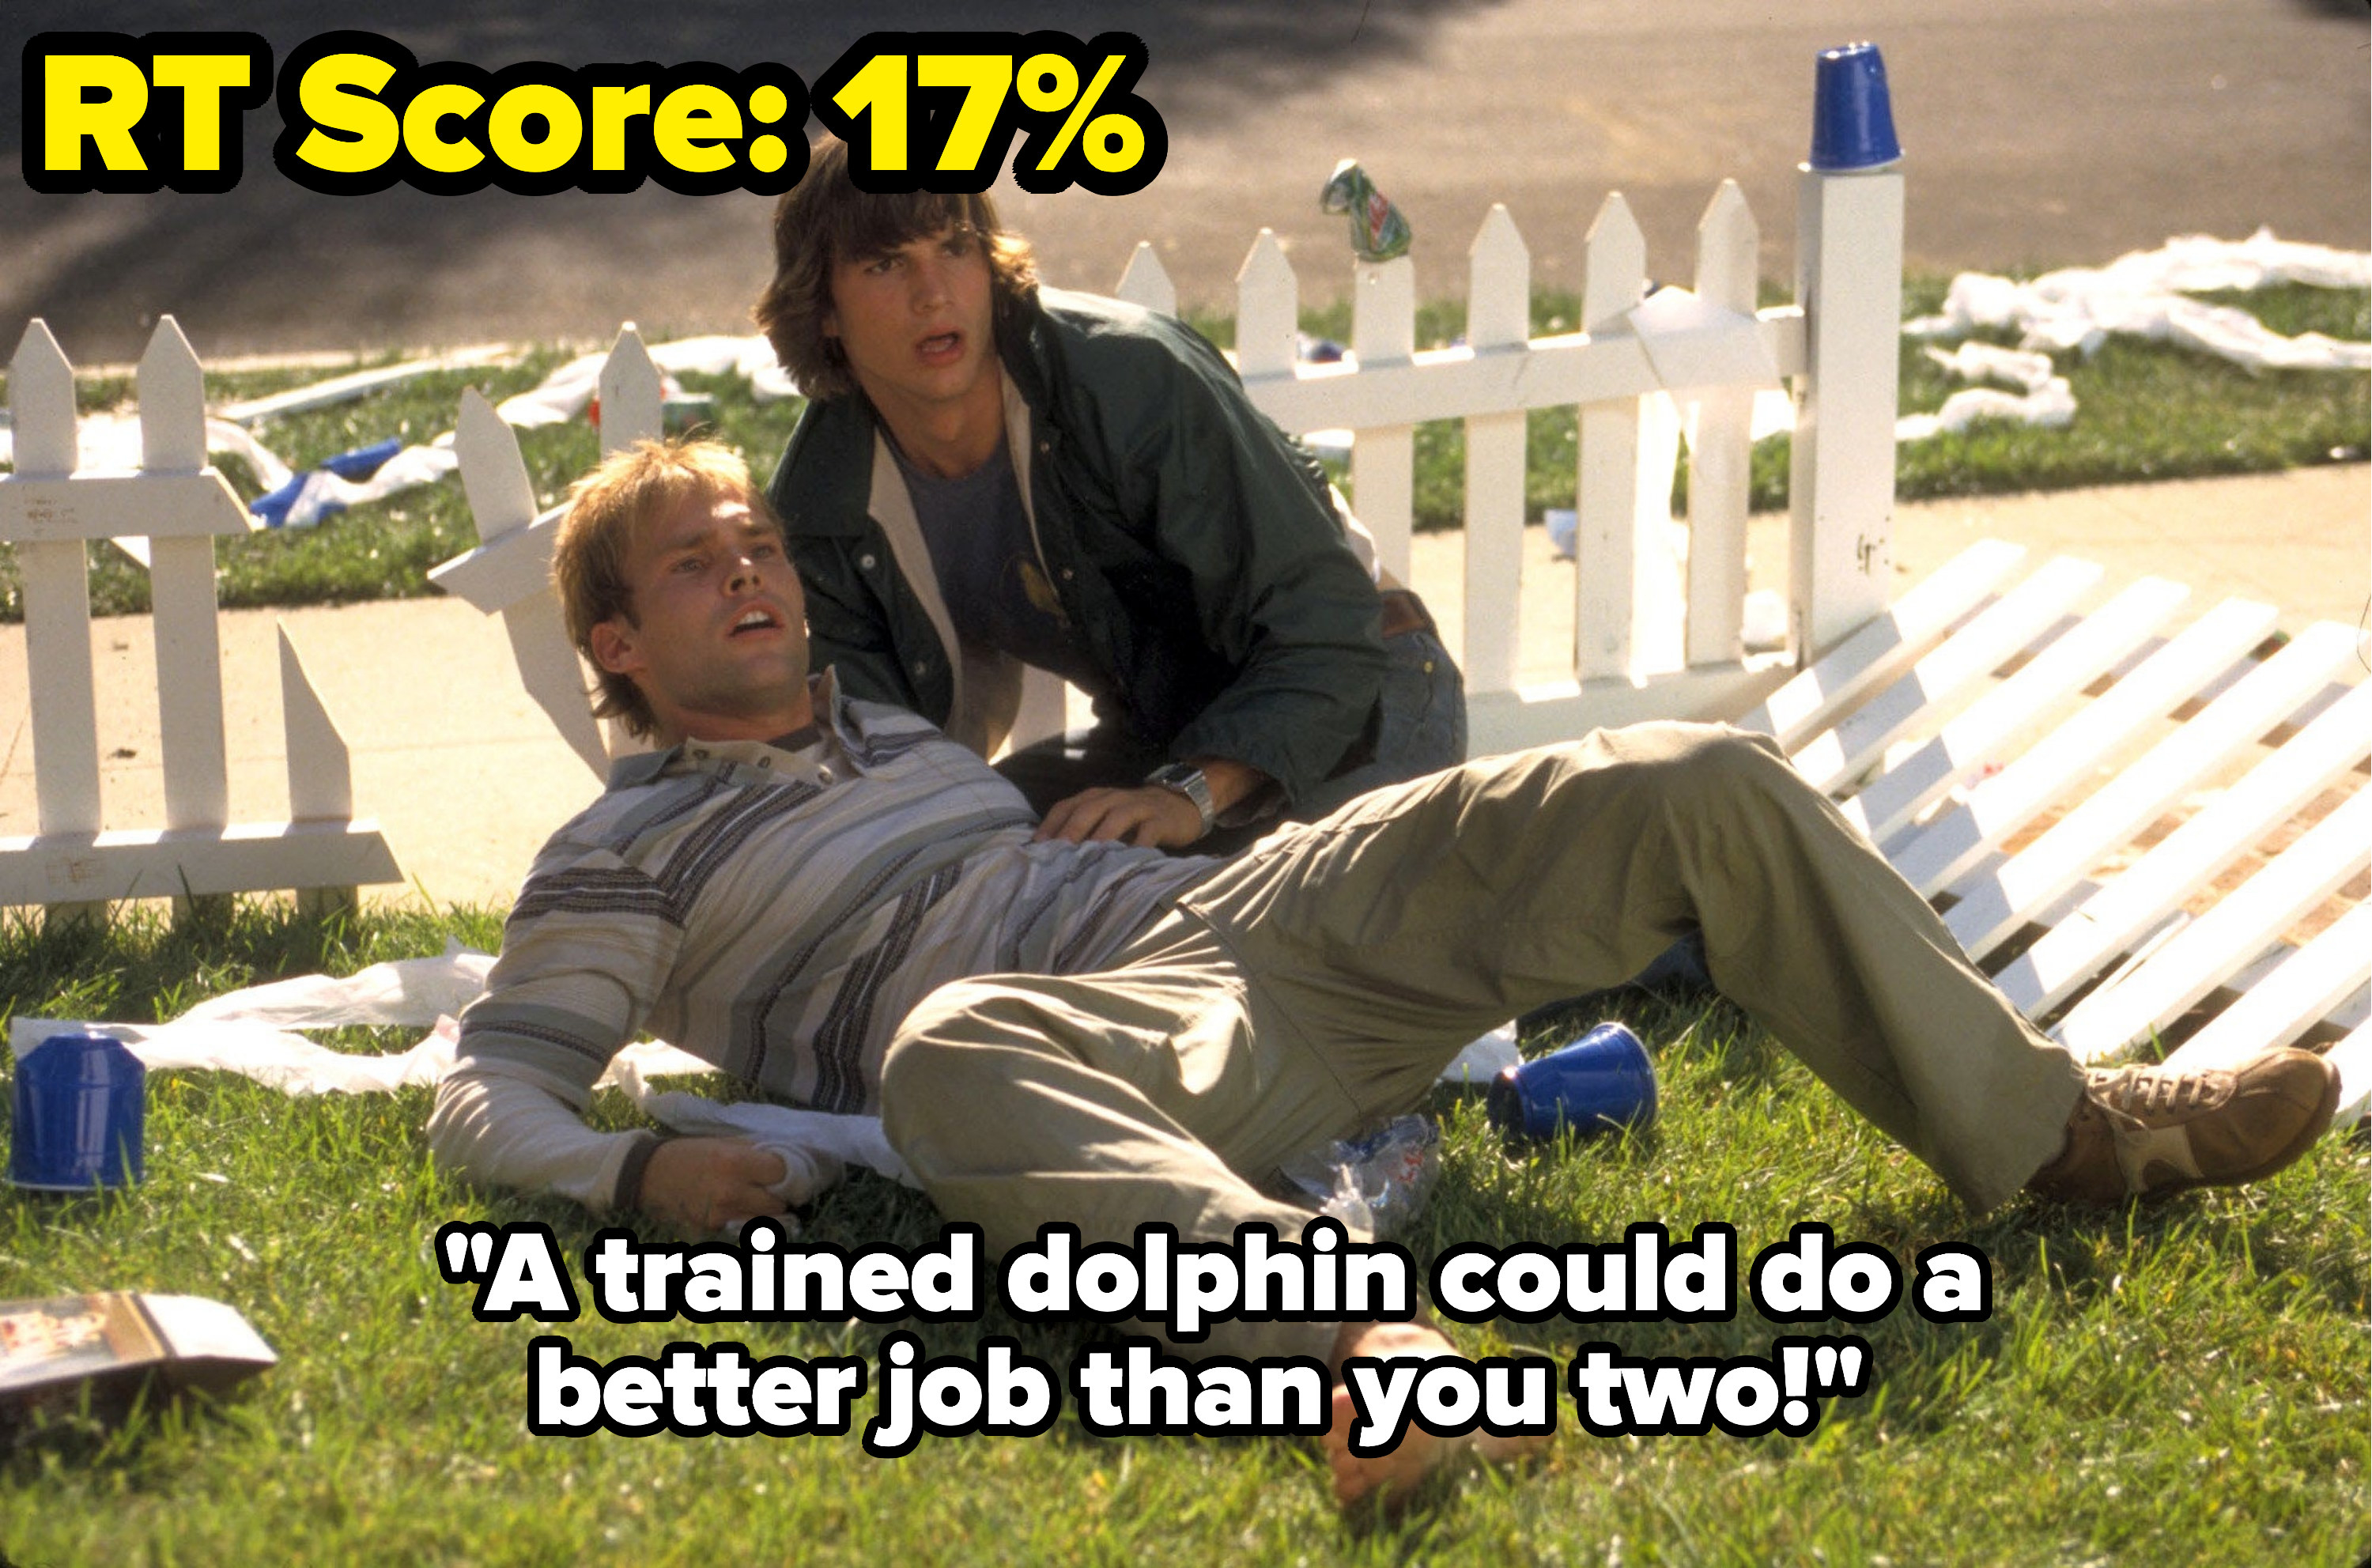 &quot;A trained dolphin could do a better job than you two!&quot;